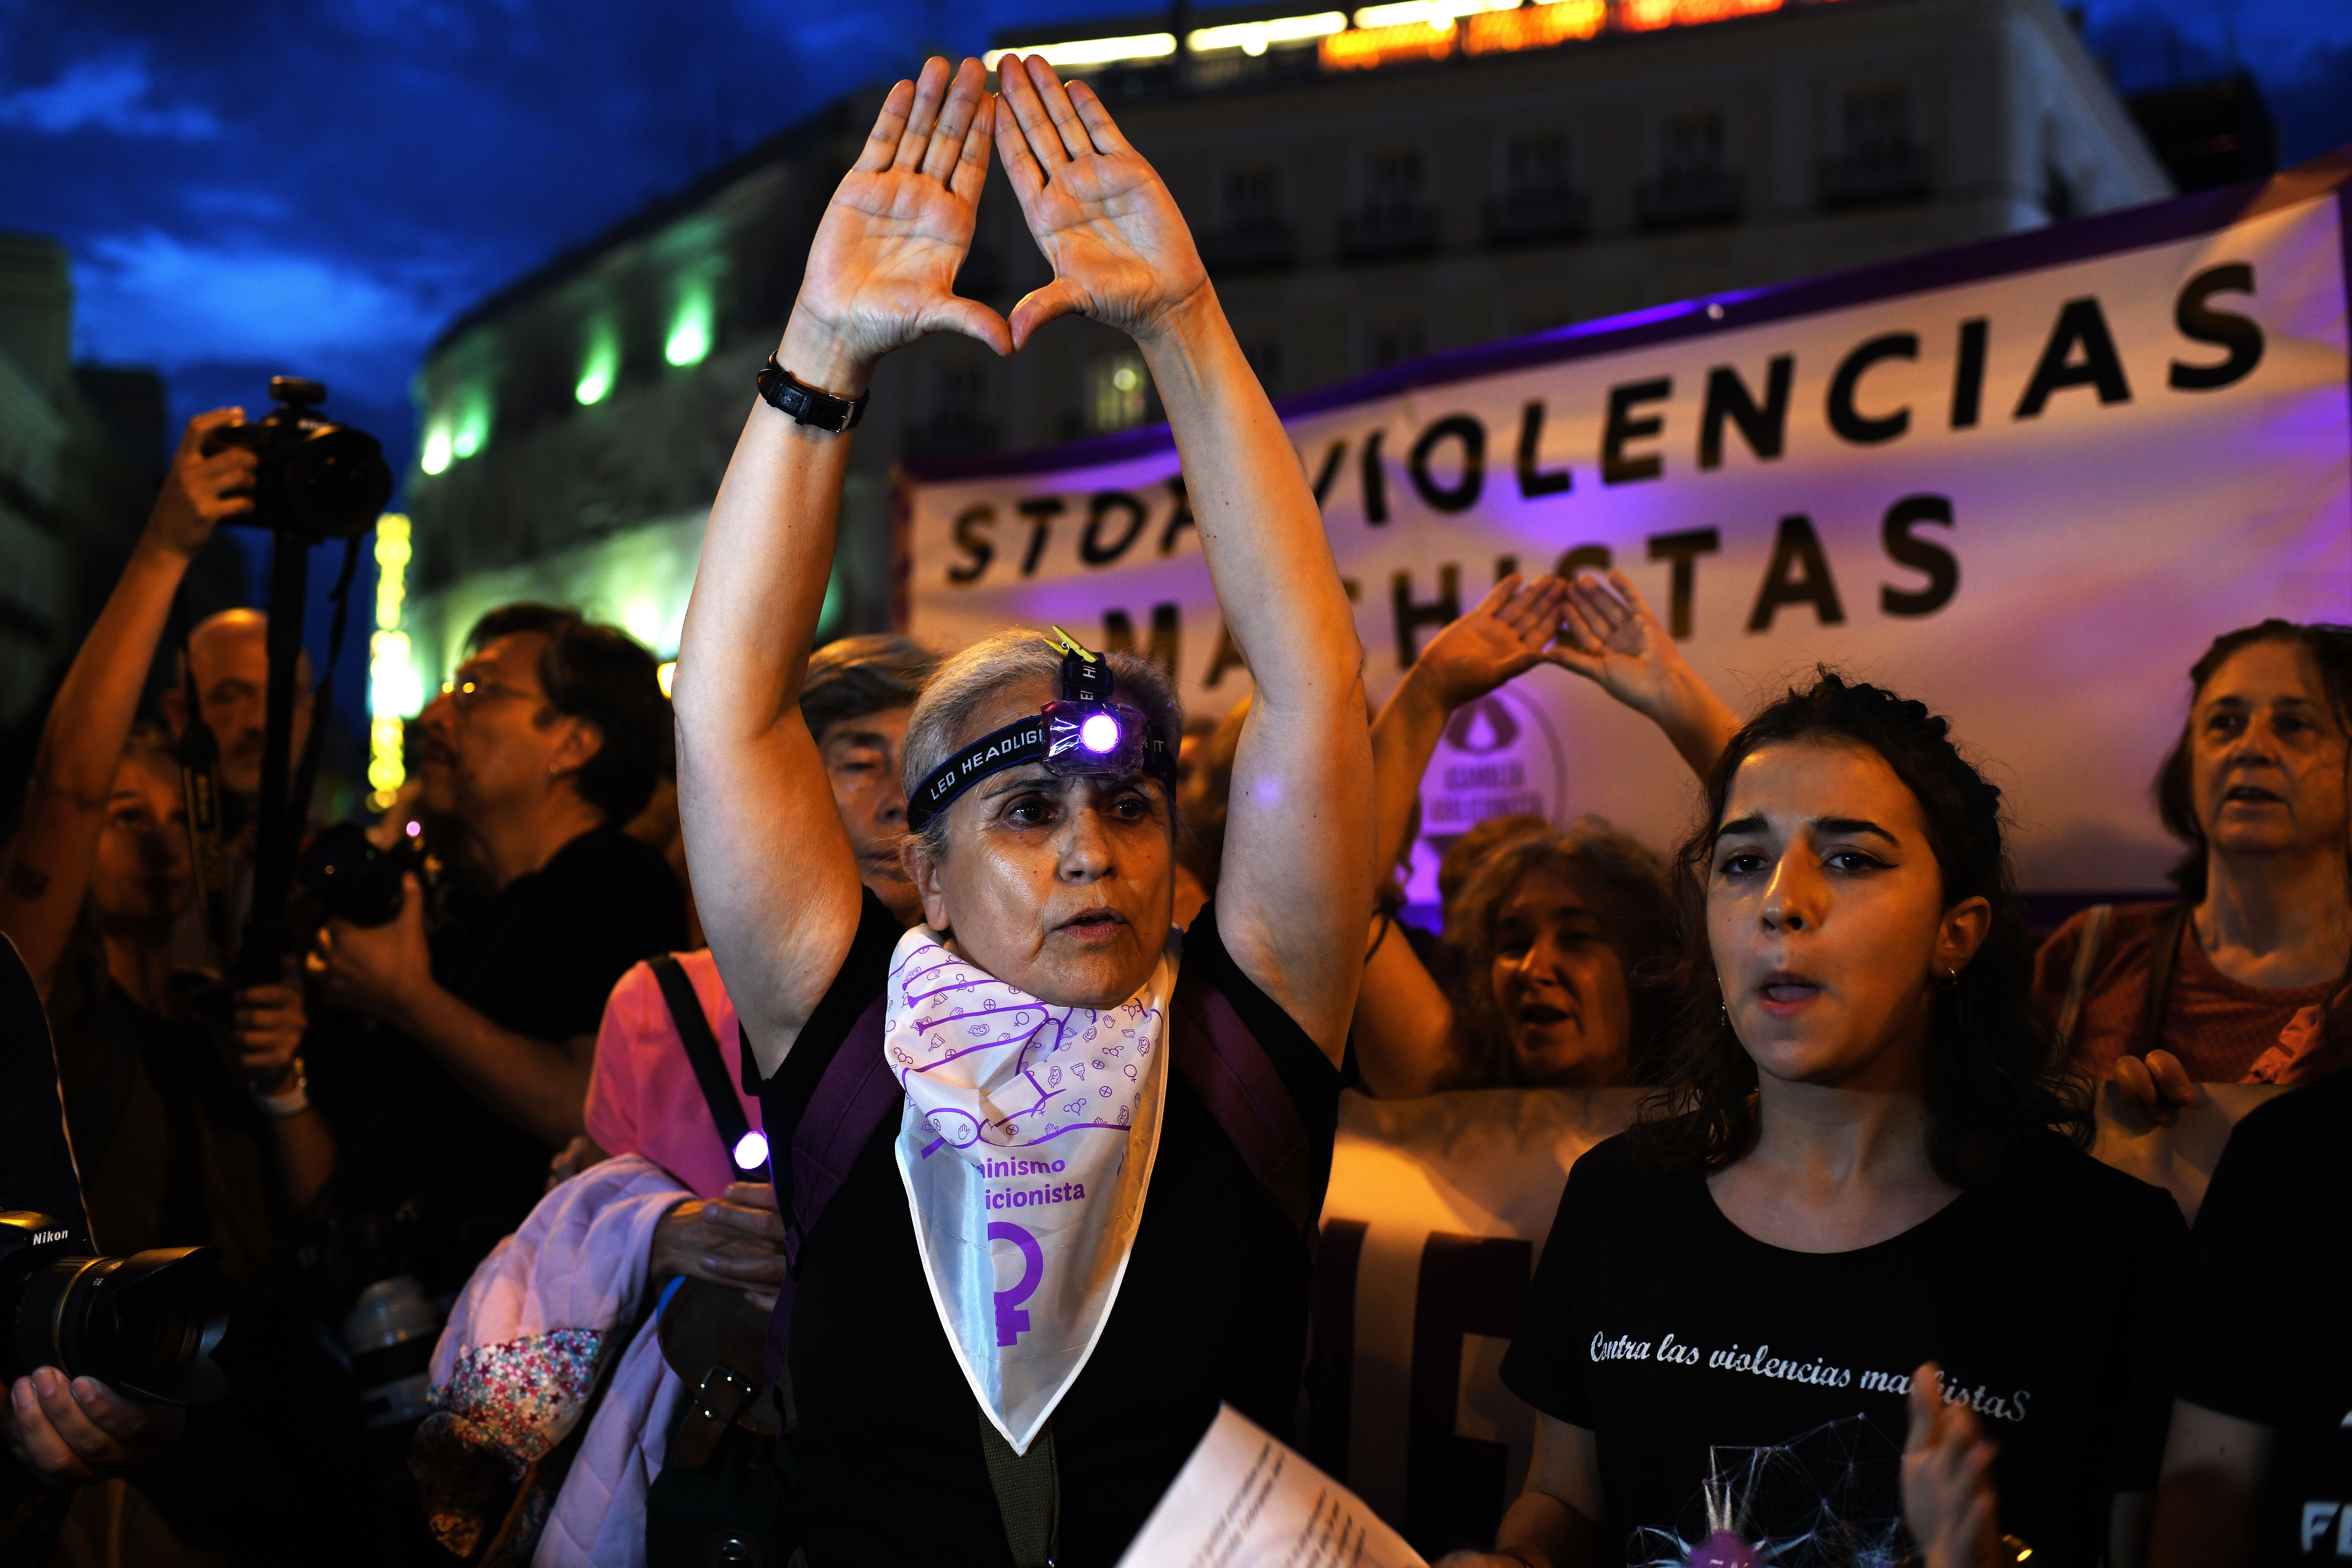 Women protesting in Spain against domestic violence